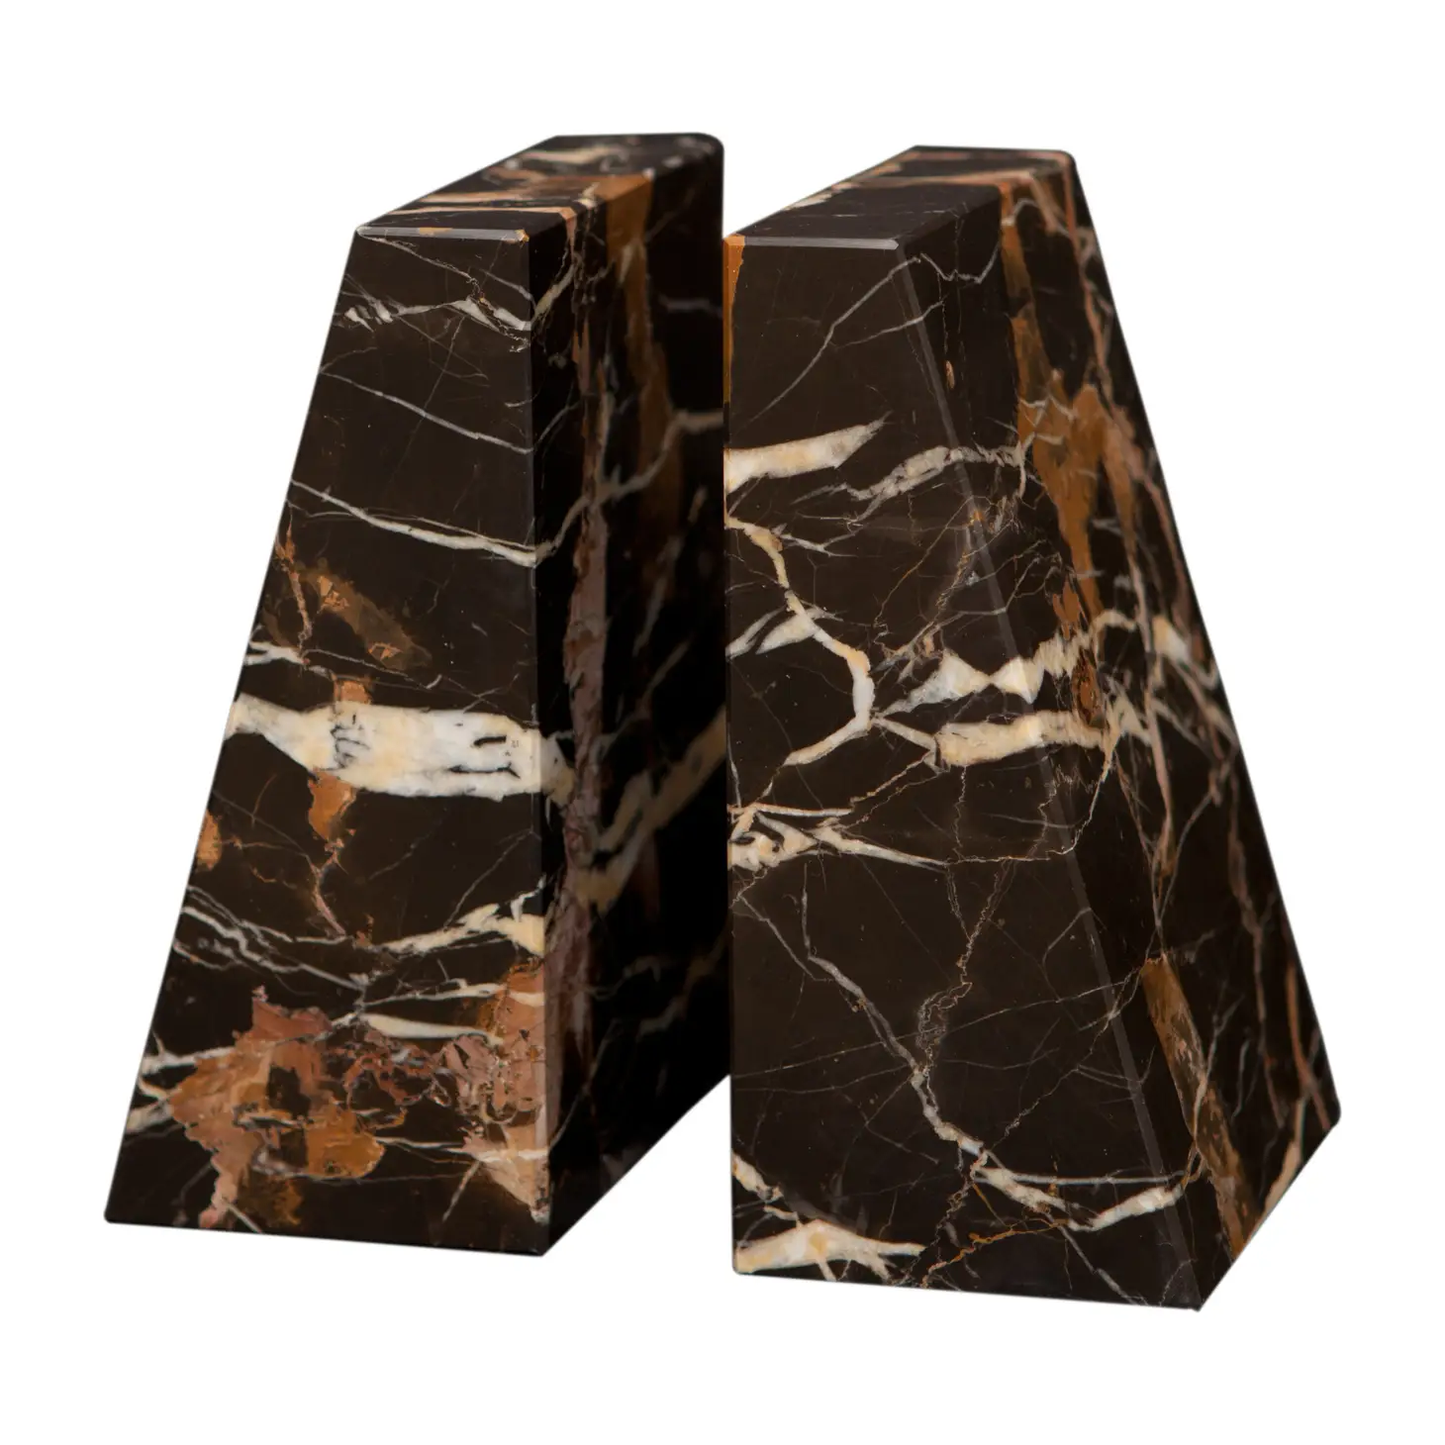 Black + Gold Marble Bookends